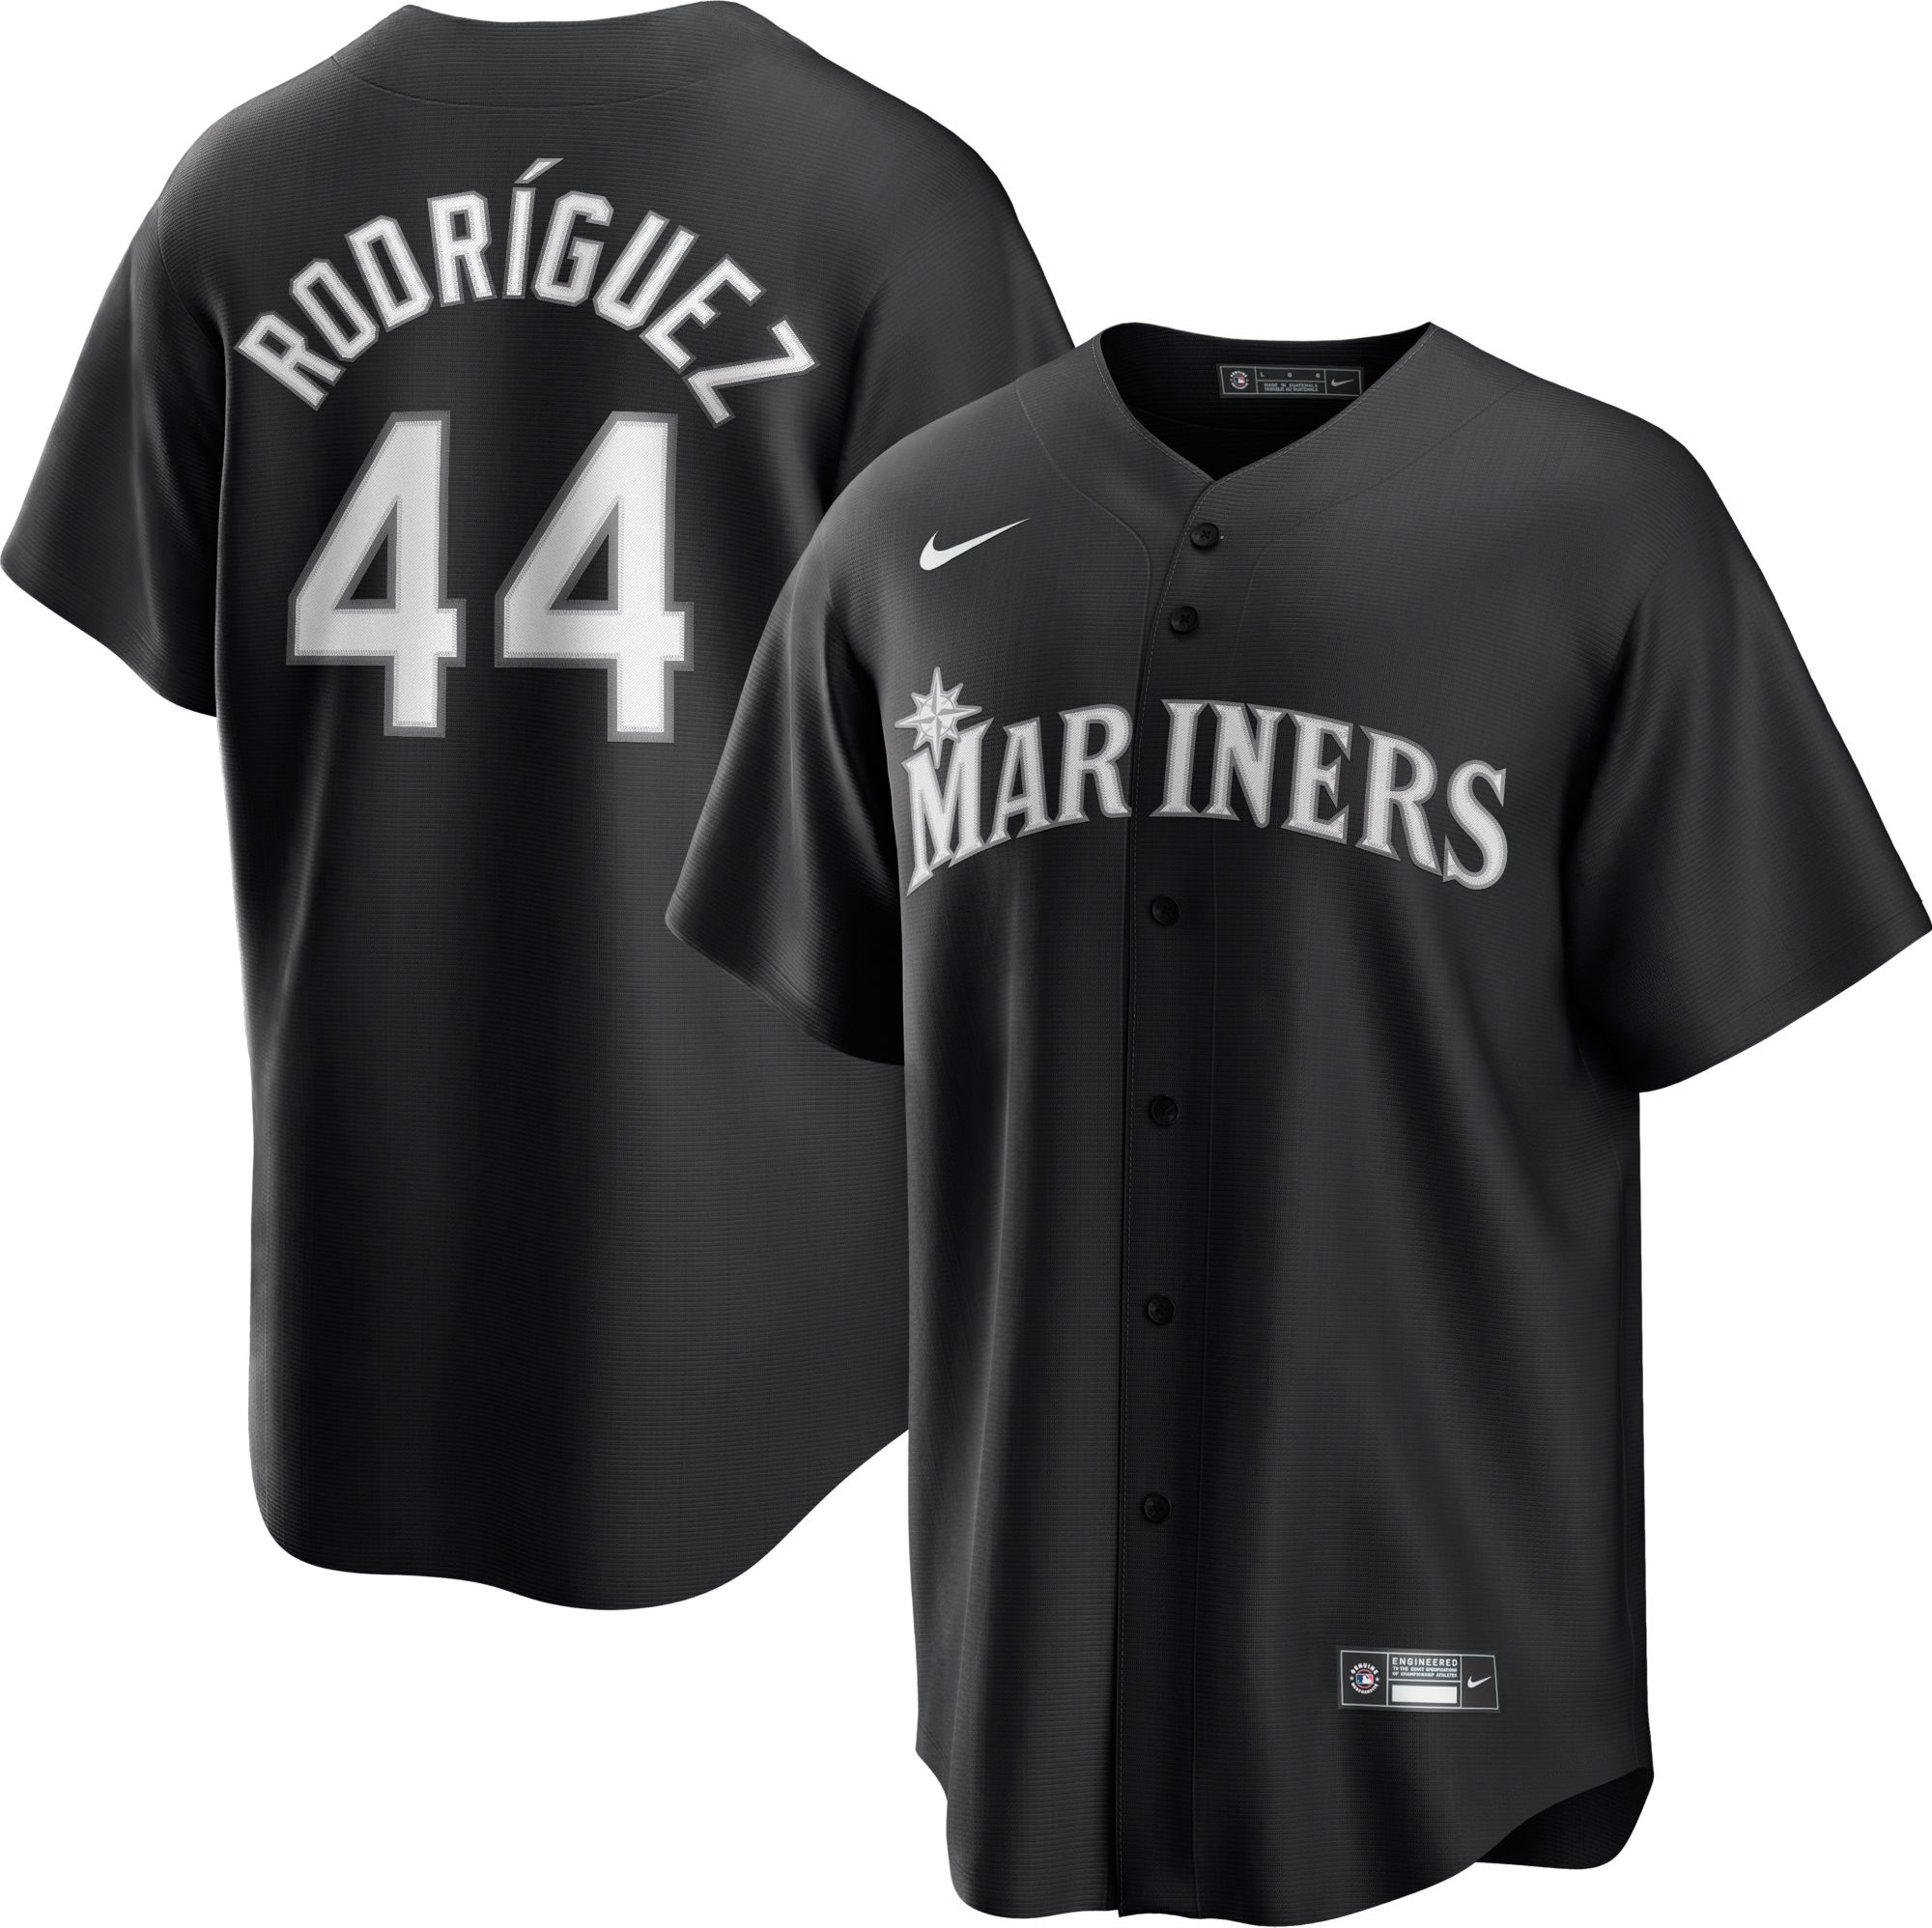 Mariners Customized Authentic Black Cool Base MLB Jersey (S-3XL)